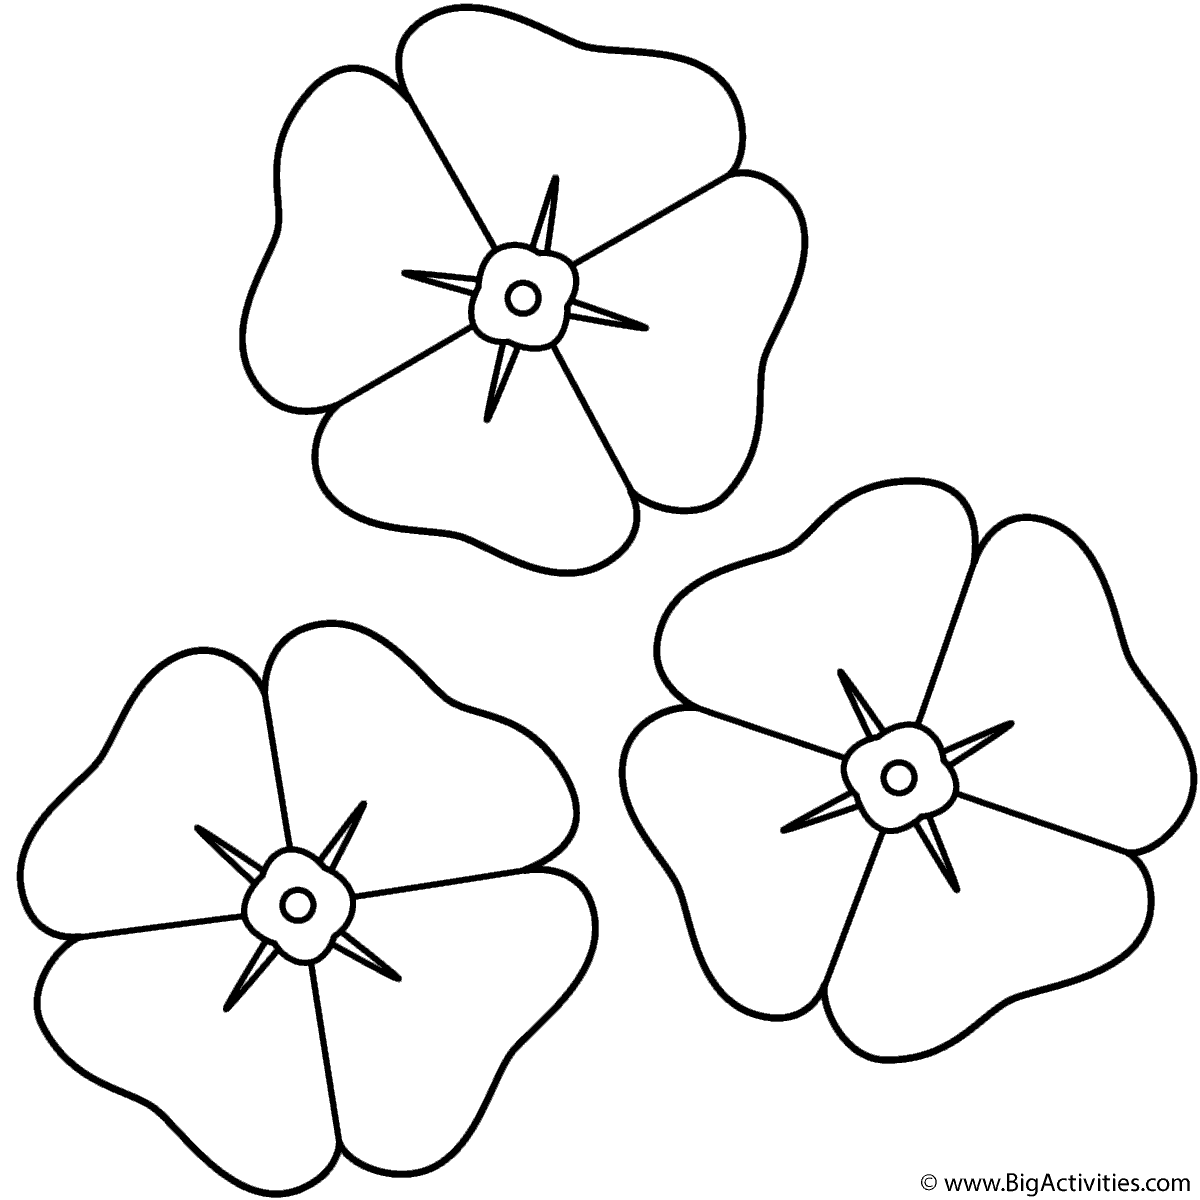 Download Poppies - Coloring Page (Anzac Day)